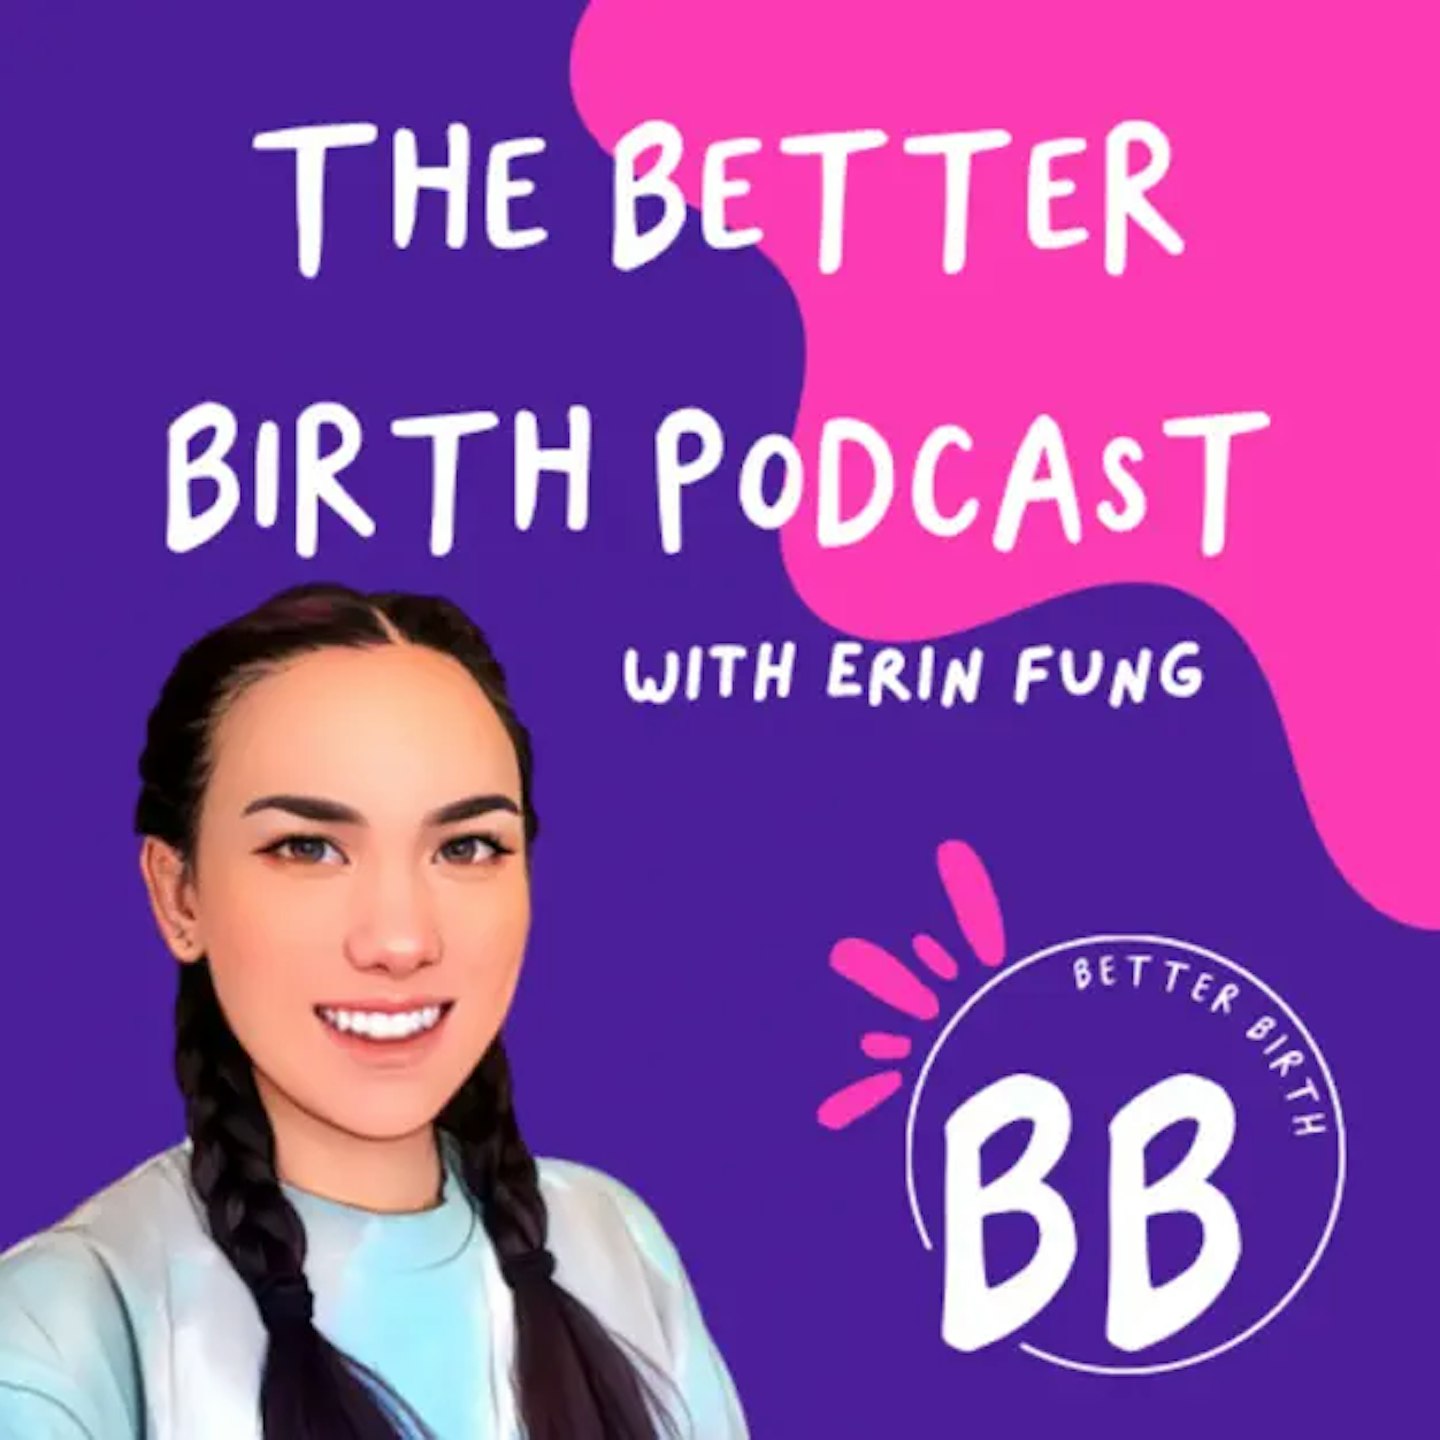 The better birth podcast